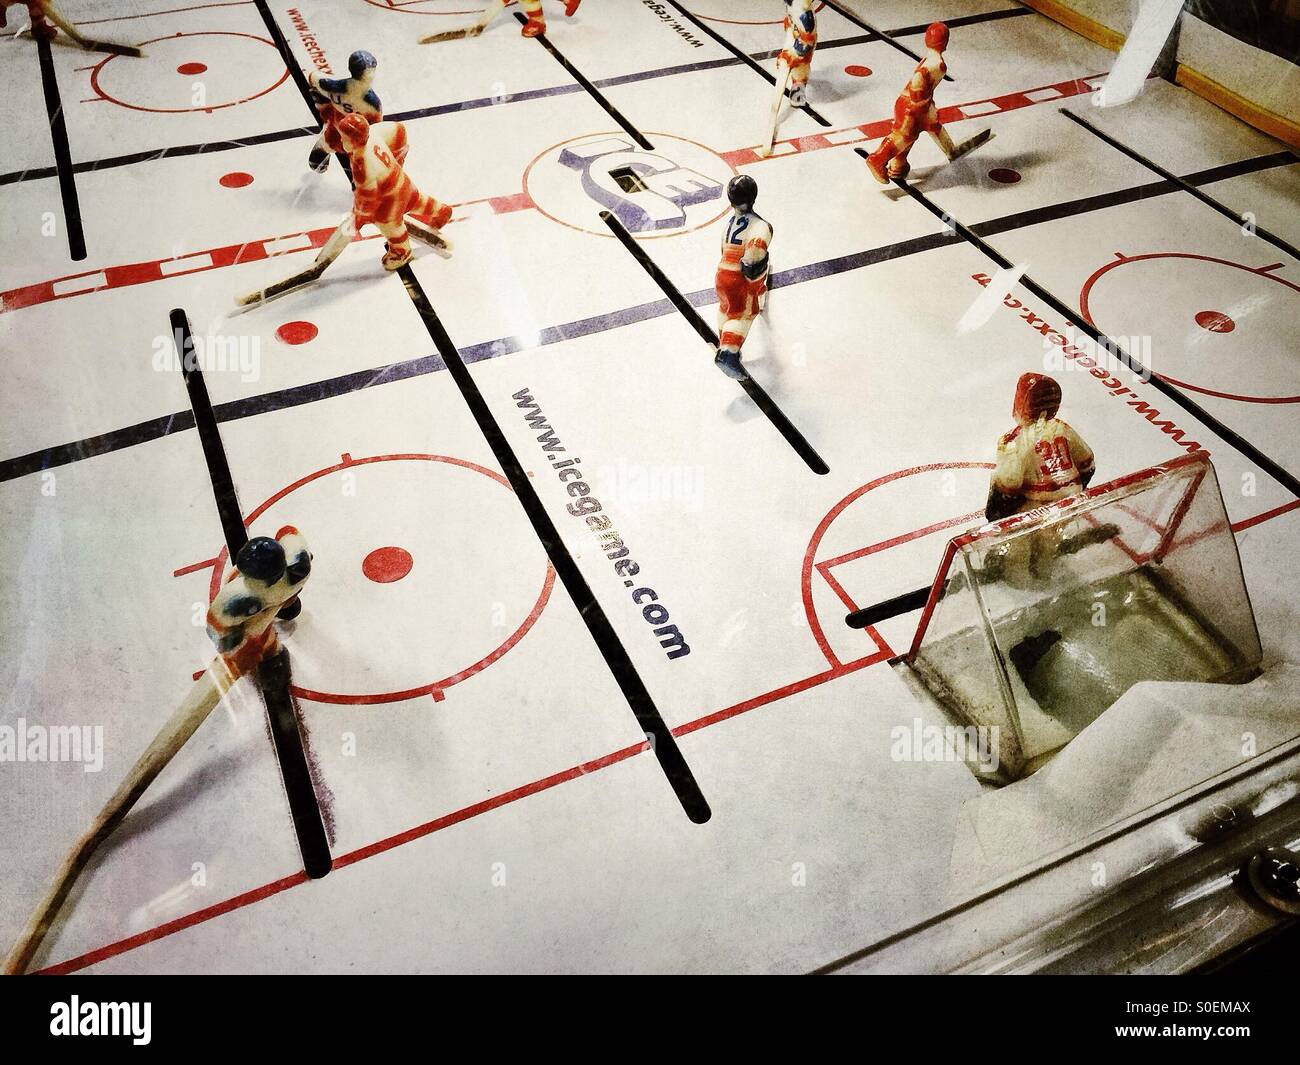 Vintage Hockey Table Game In The Arcade Stock Photo 310109938 Alamy